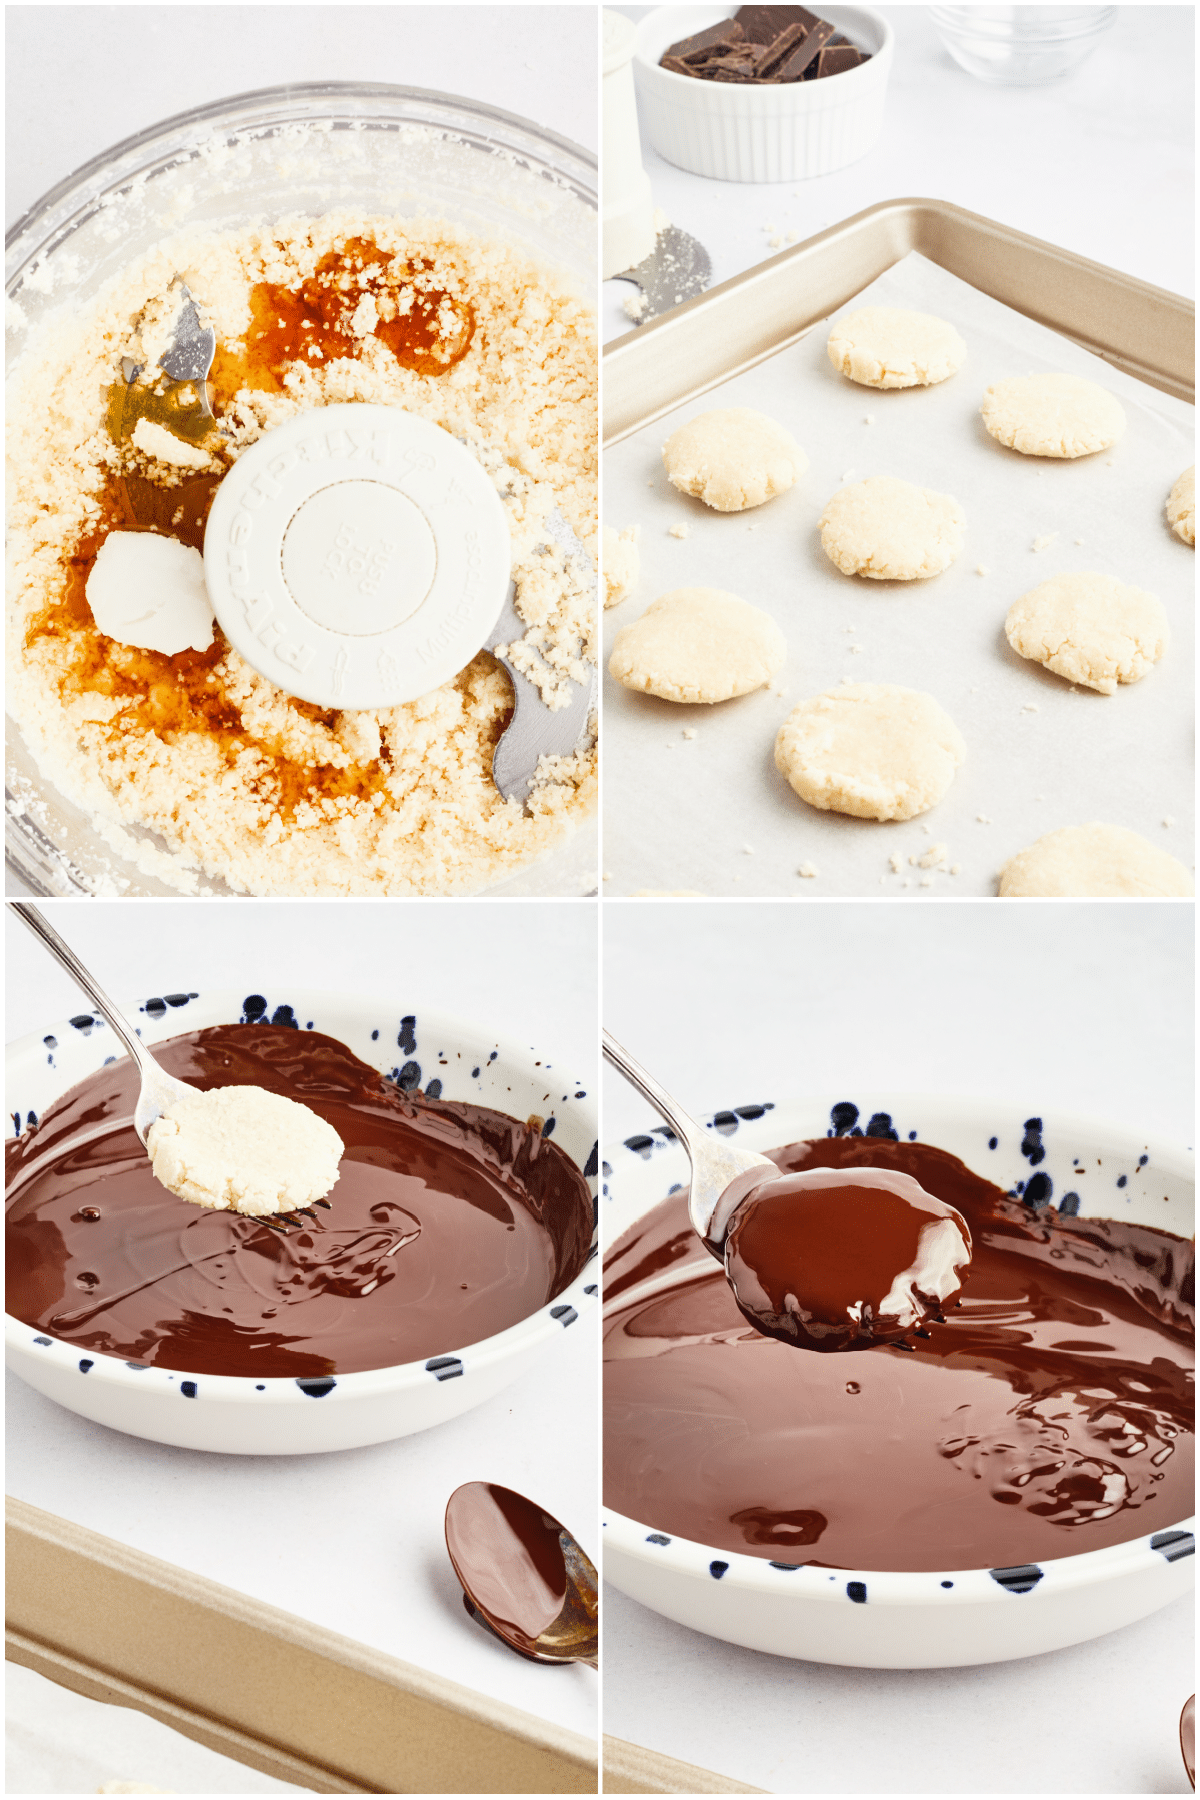 A four image collage showing how to make dairy free peppermint patties: process coconut to a paste, add flavorings and sweetener, shape into discs, and dip into melted chocolate.